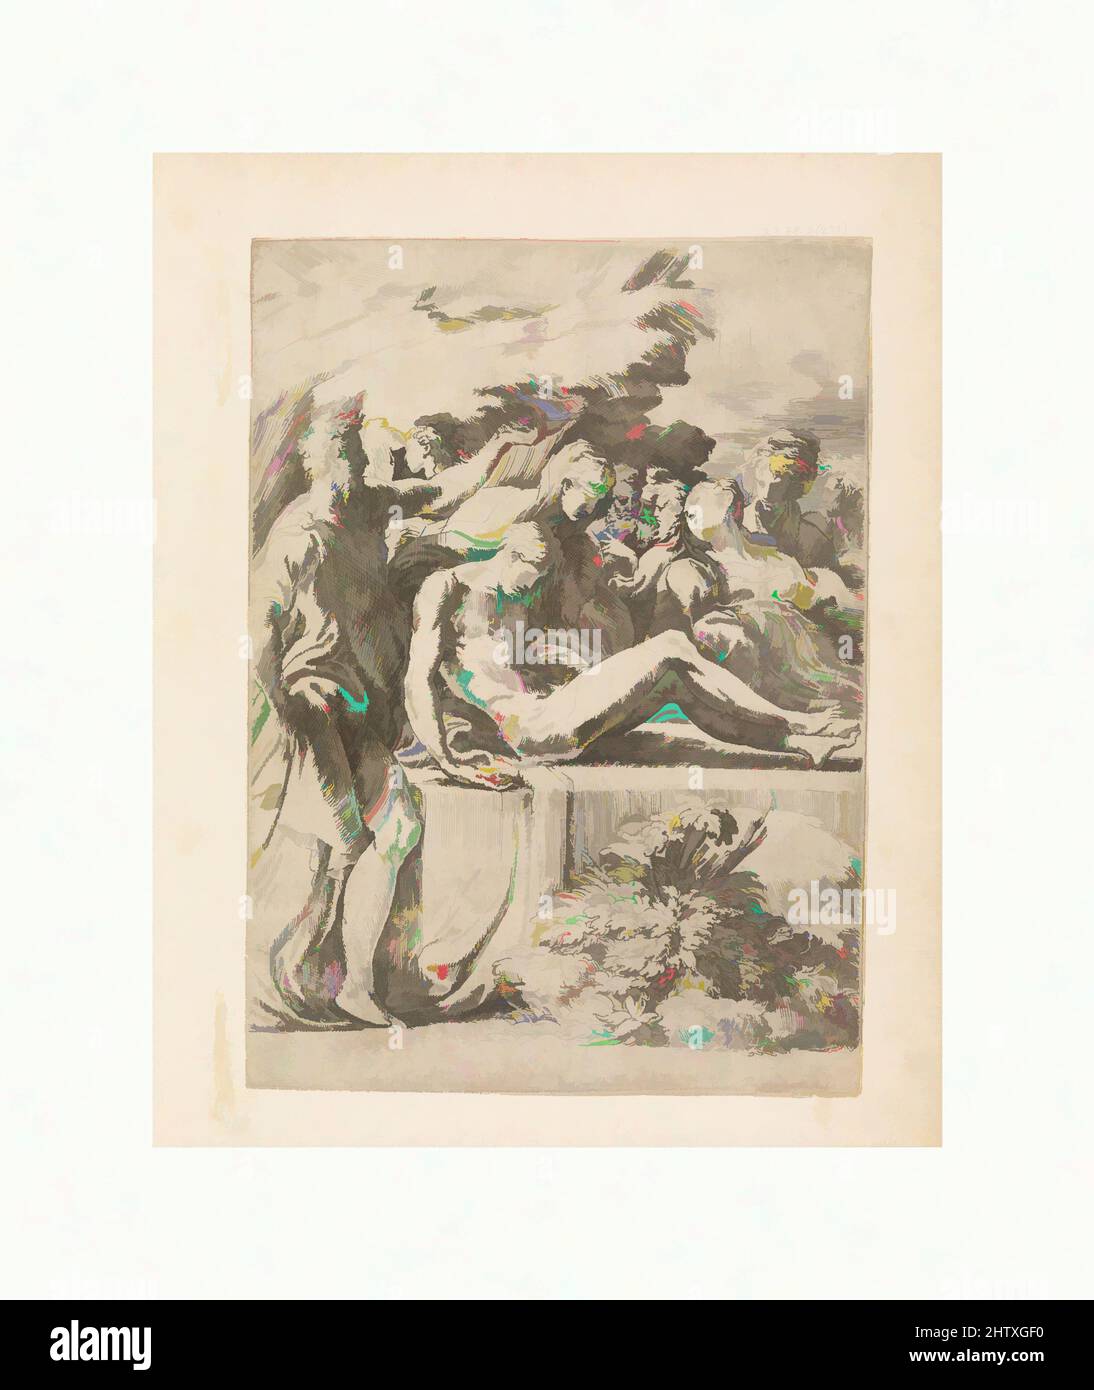 Art inspired by Entombment, 1527-1530, Etching, Prints, Parmigianino (Girolamo Francesco Maria Mazzola) (Italian, Parma 1503–1540 Casalmaggiore), In Mariette Album, folio 6, Classic works modernized by Artotop with a splash of modernity. Shapes, color and value, eye-catching visual impact on art. Emotions through freedom of artworks in a contemporary way. A timeless message pursuing a wildly creative new direction. Artists turning to the digital medium and creating the Artotop NFT Stock Photo